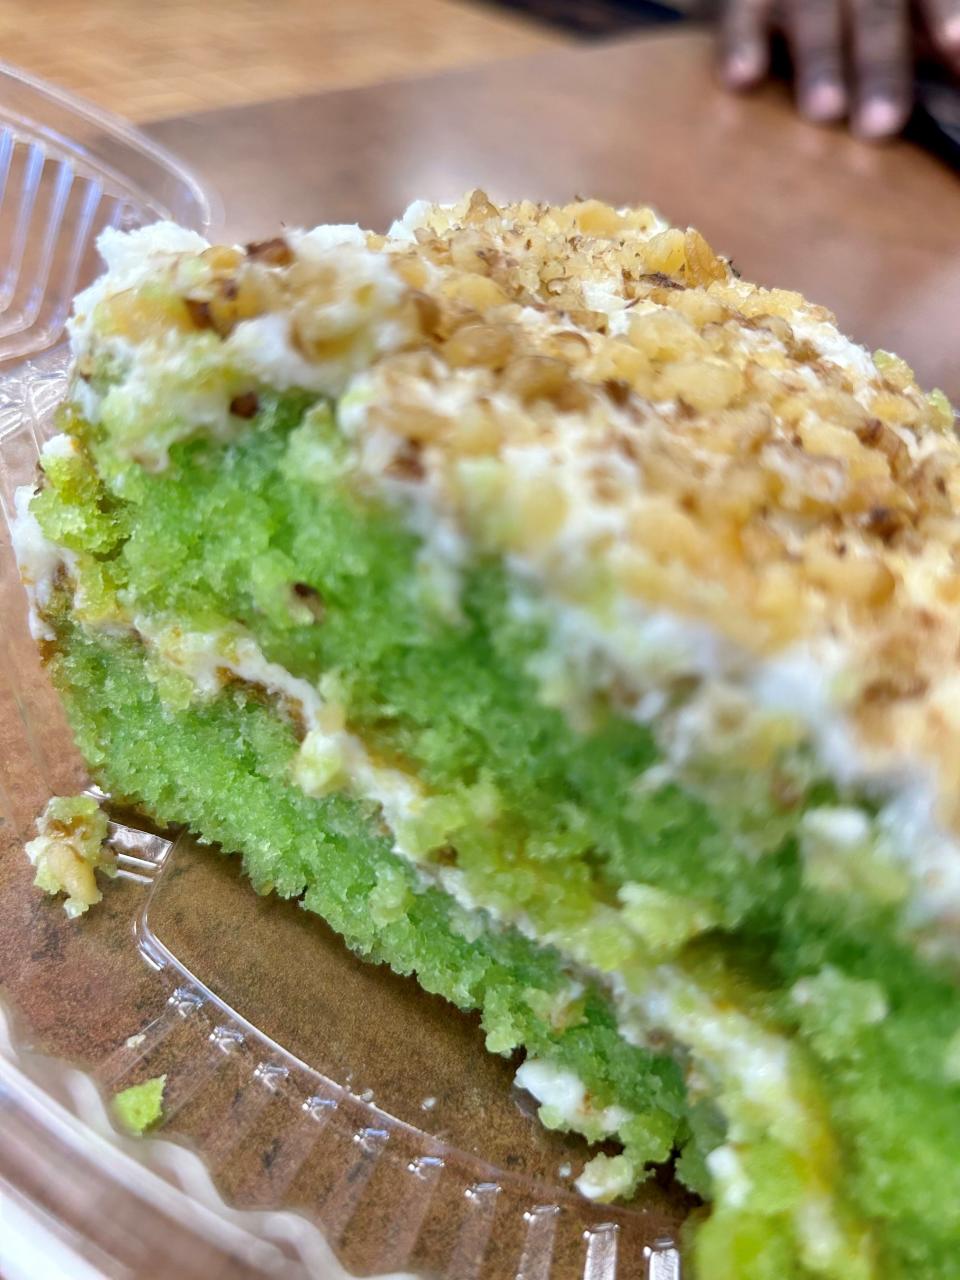 Key lime cake is a favorite Sunday dessert at Chef's Kitchen in Cocoa.